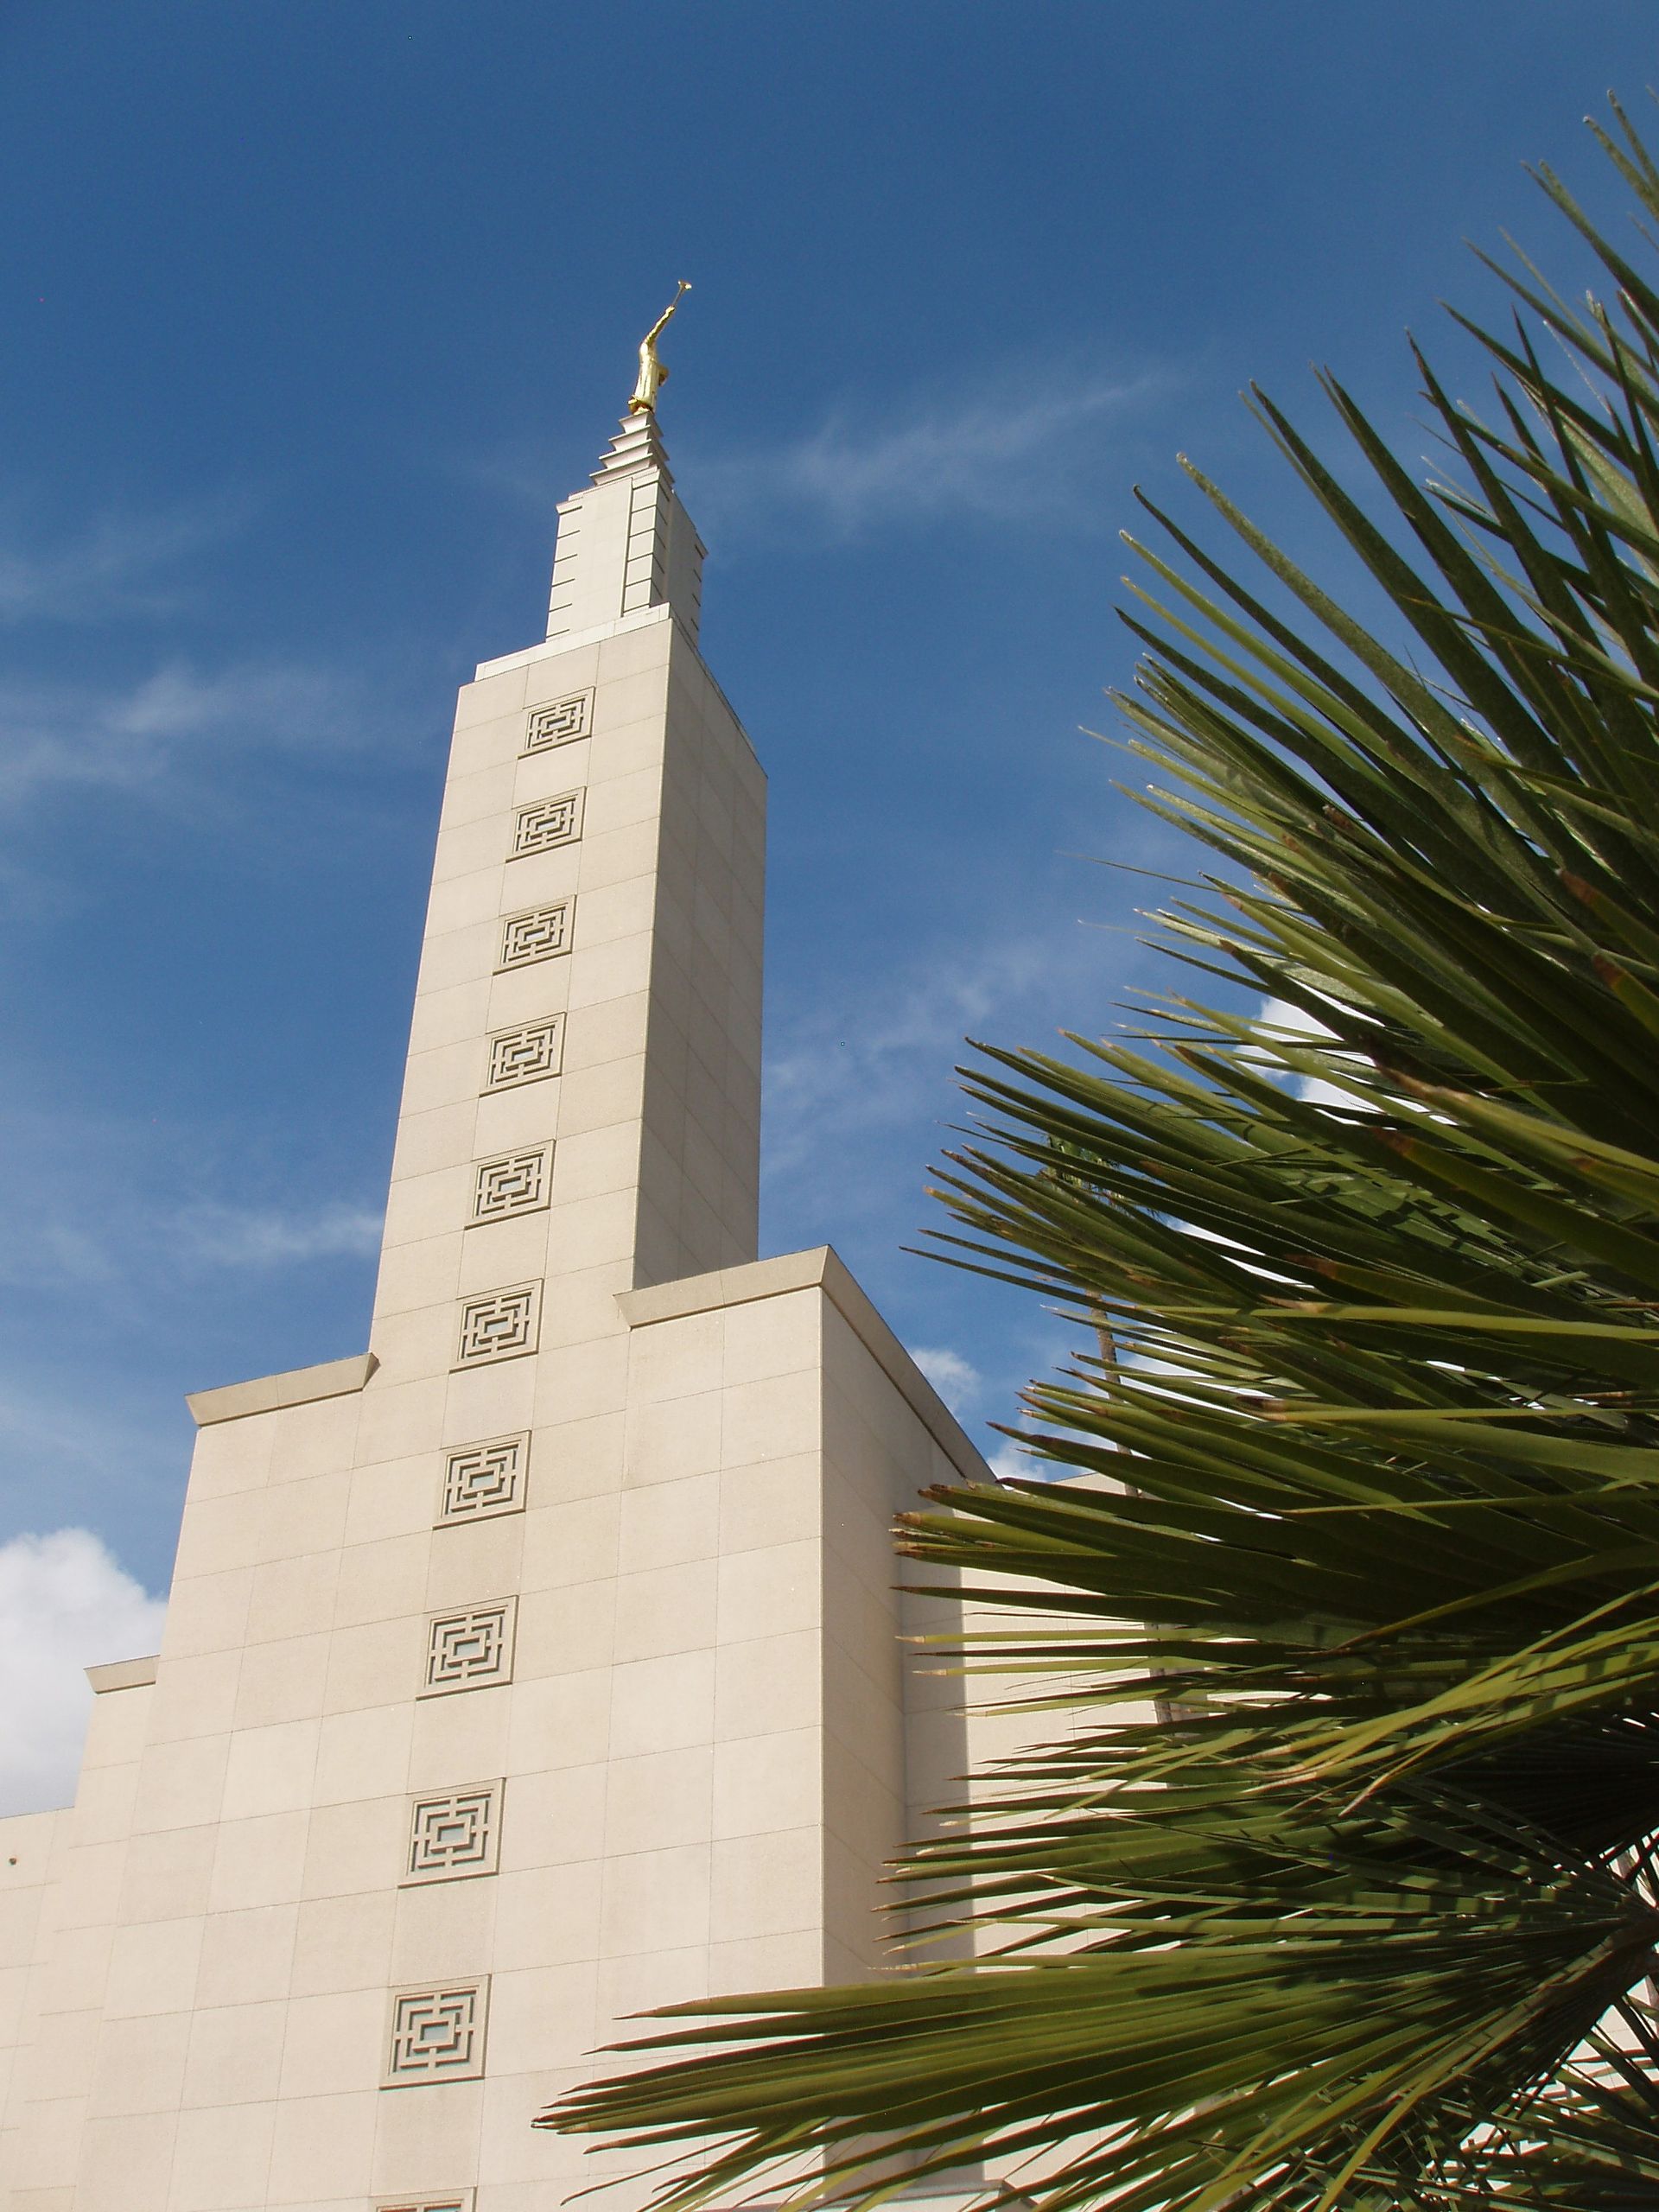 The Los Angeles California Temple spire, including the exterior of the temple.